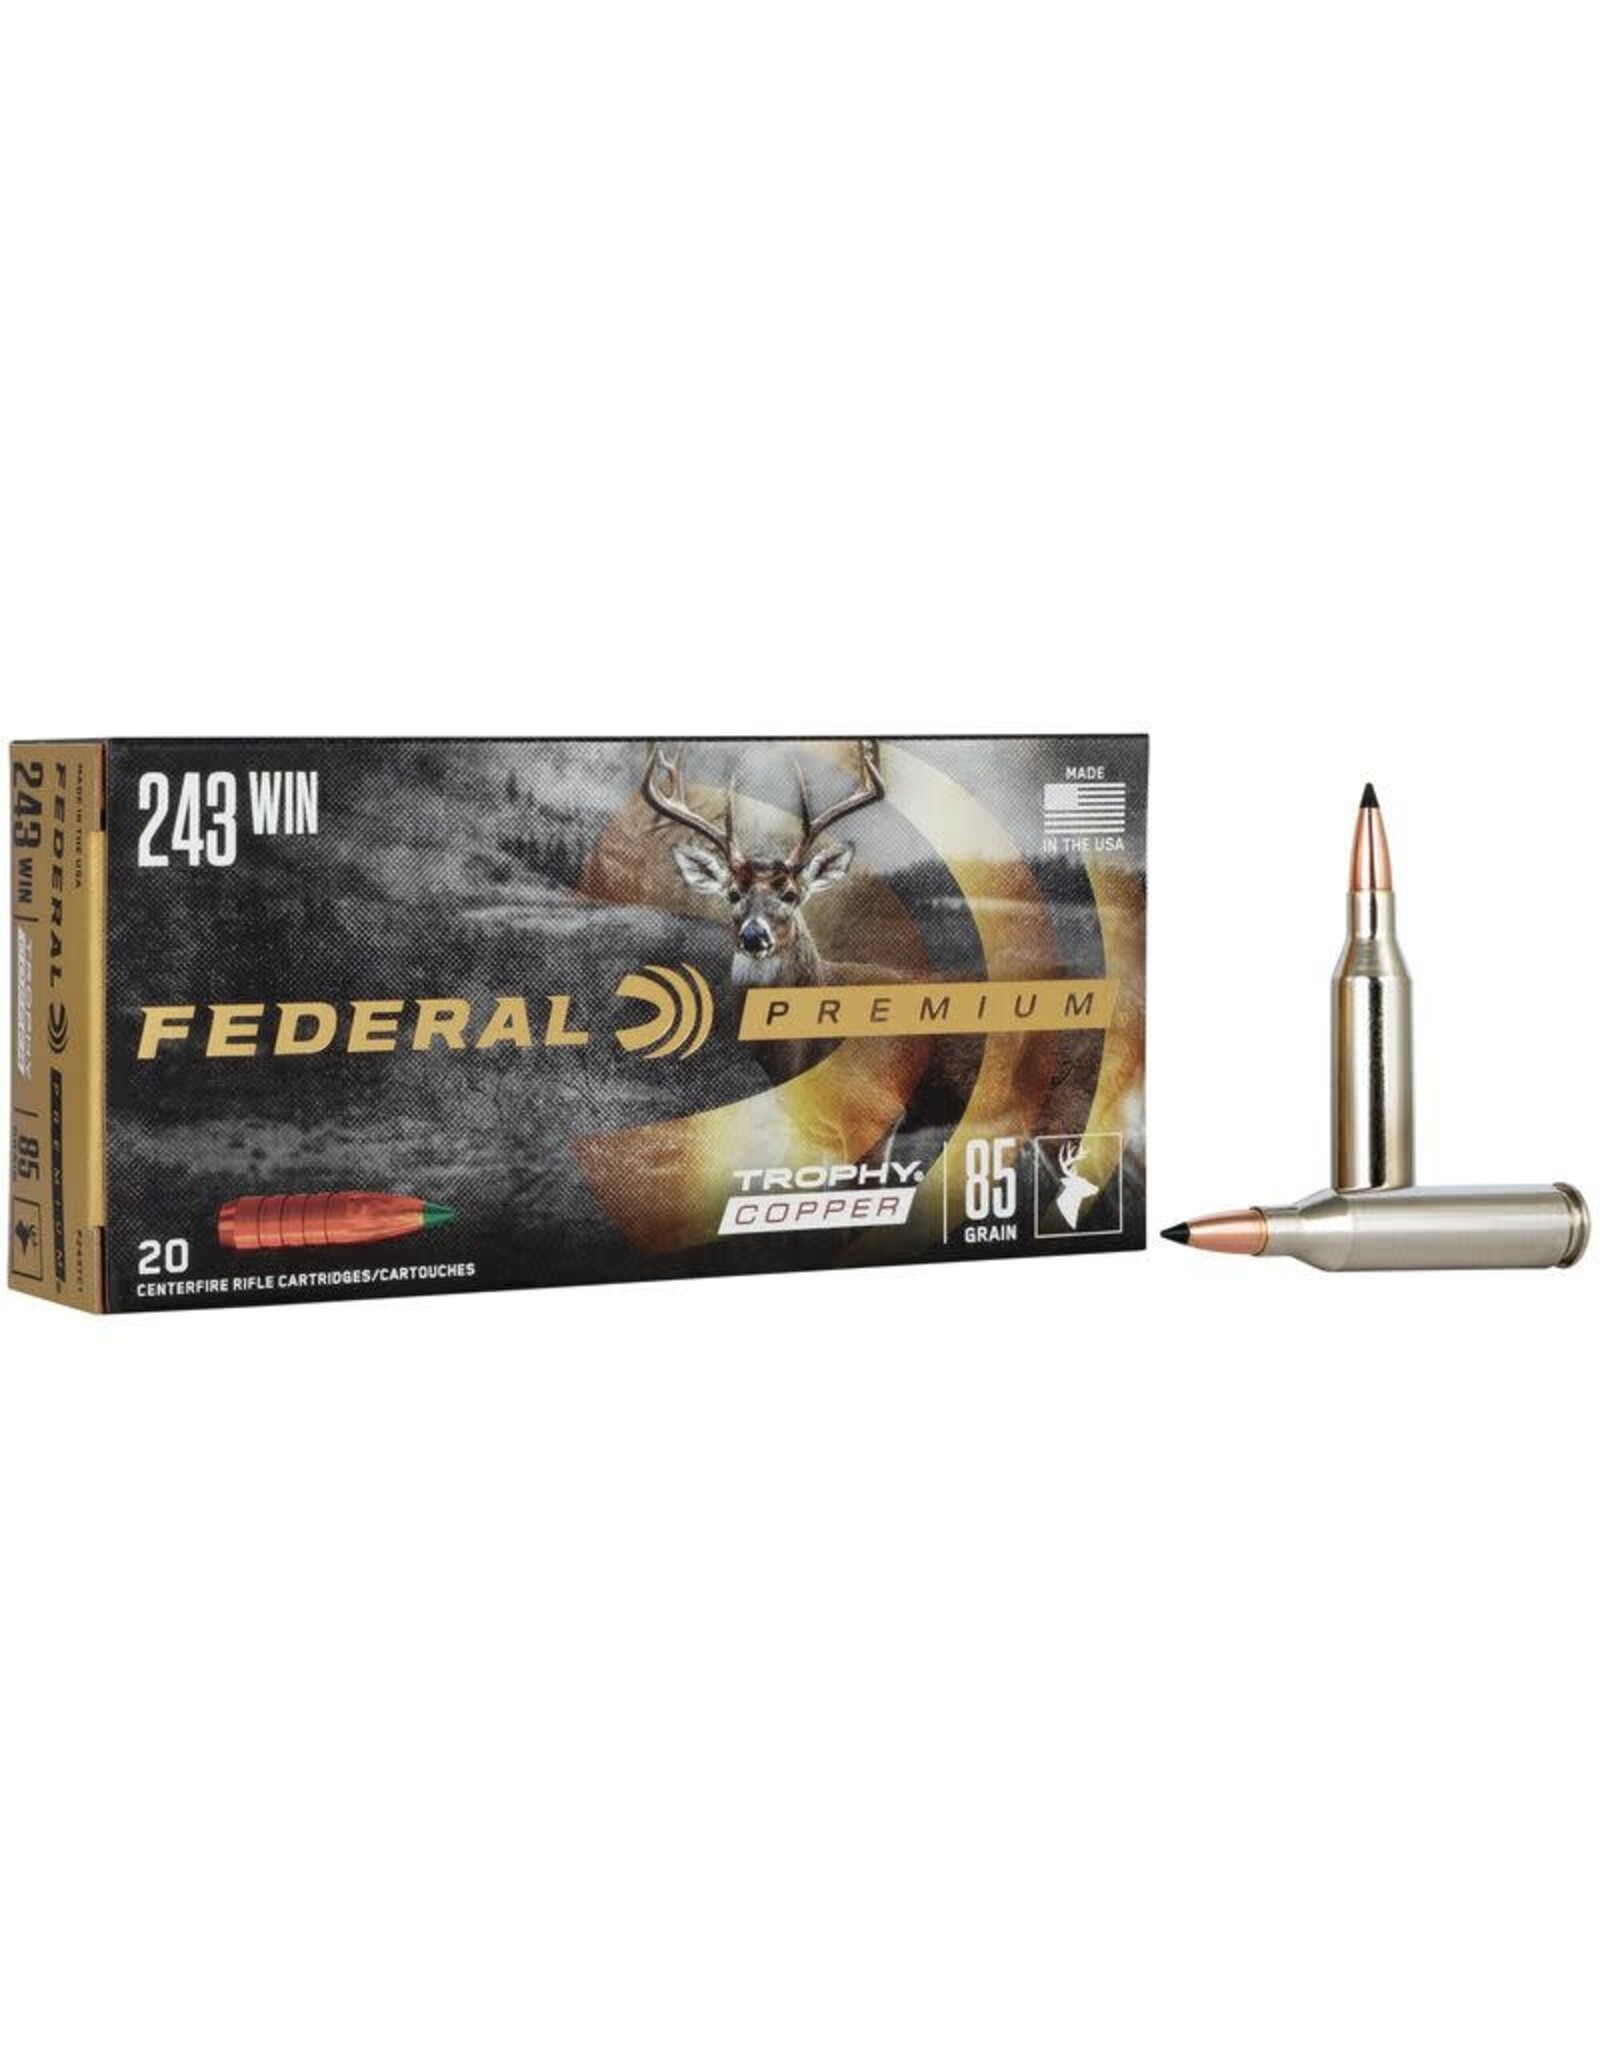 Federal Federal Premium Trophy Copper .243 Win 85 Gr - 20 Count